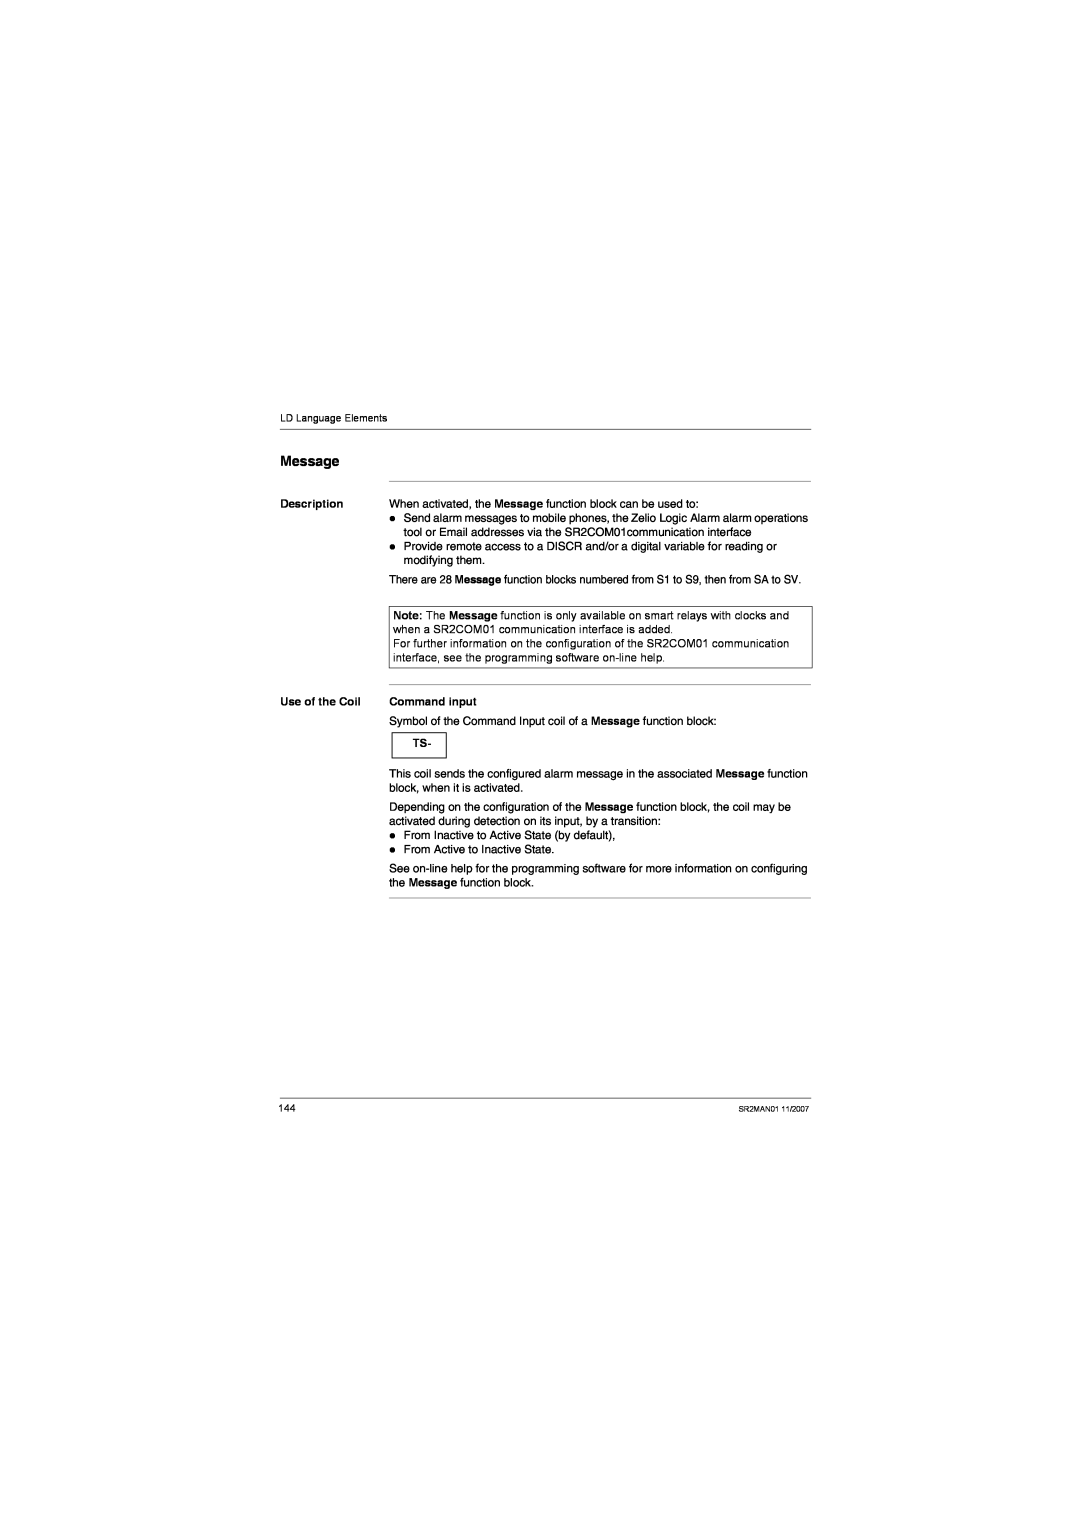 Schneider Electric SR2MAN01 user manual Message, Description, Use of the Coil, Command input 